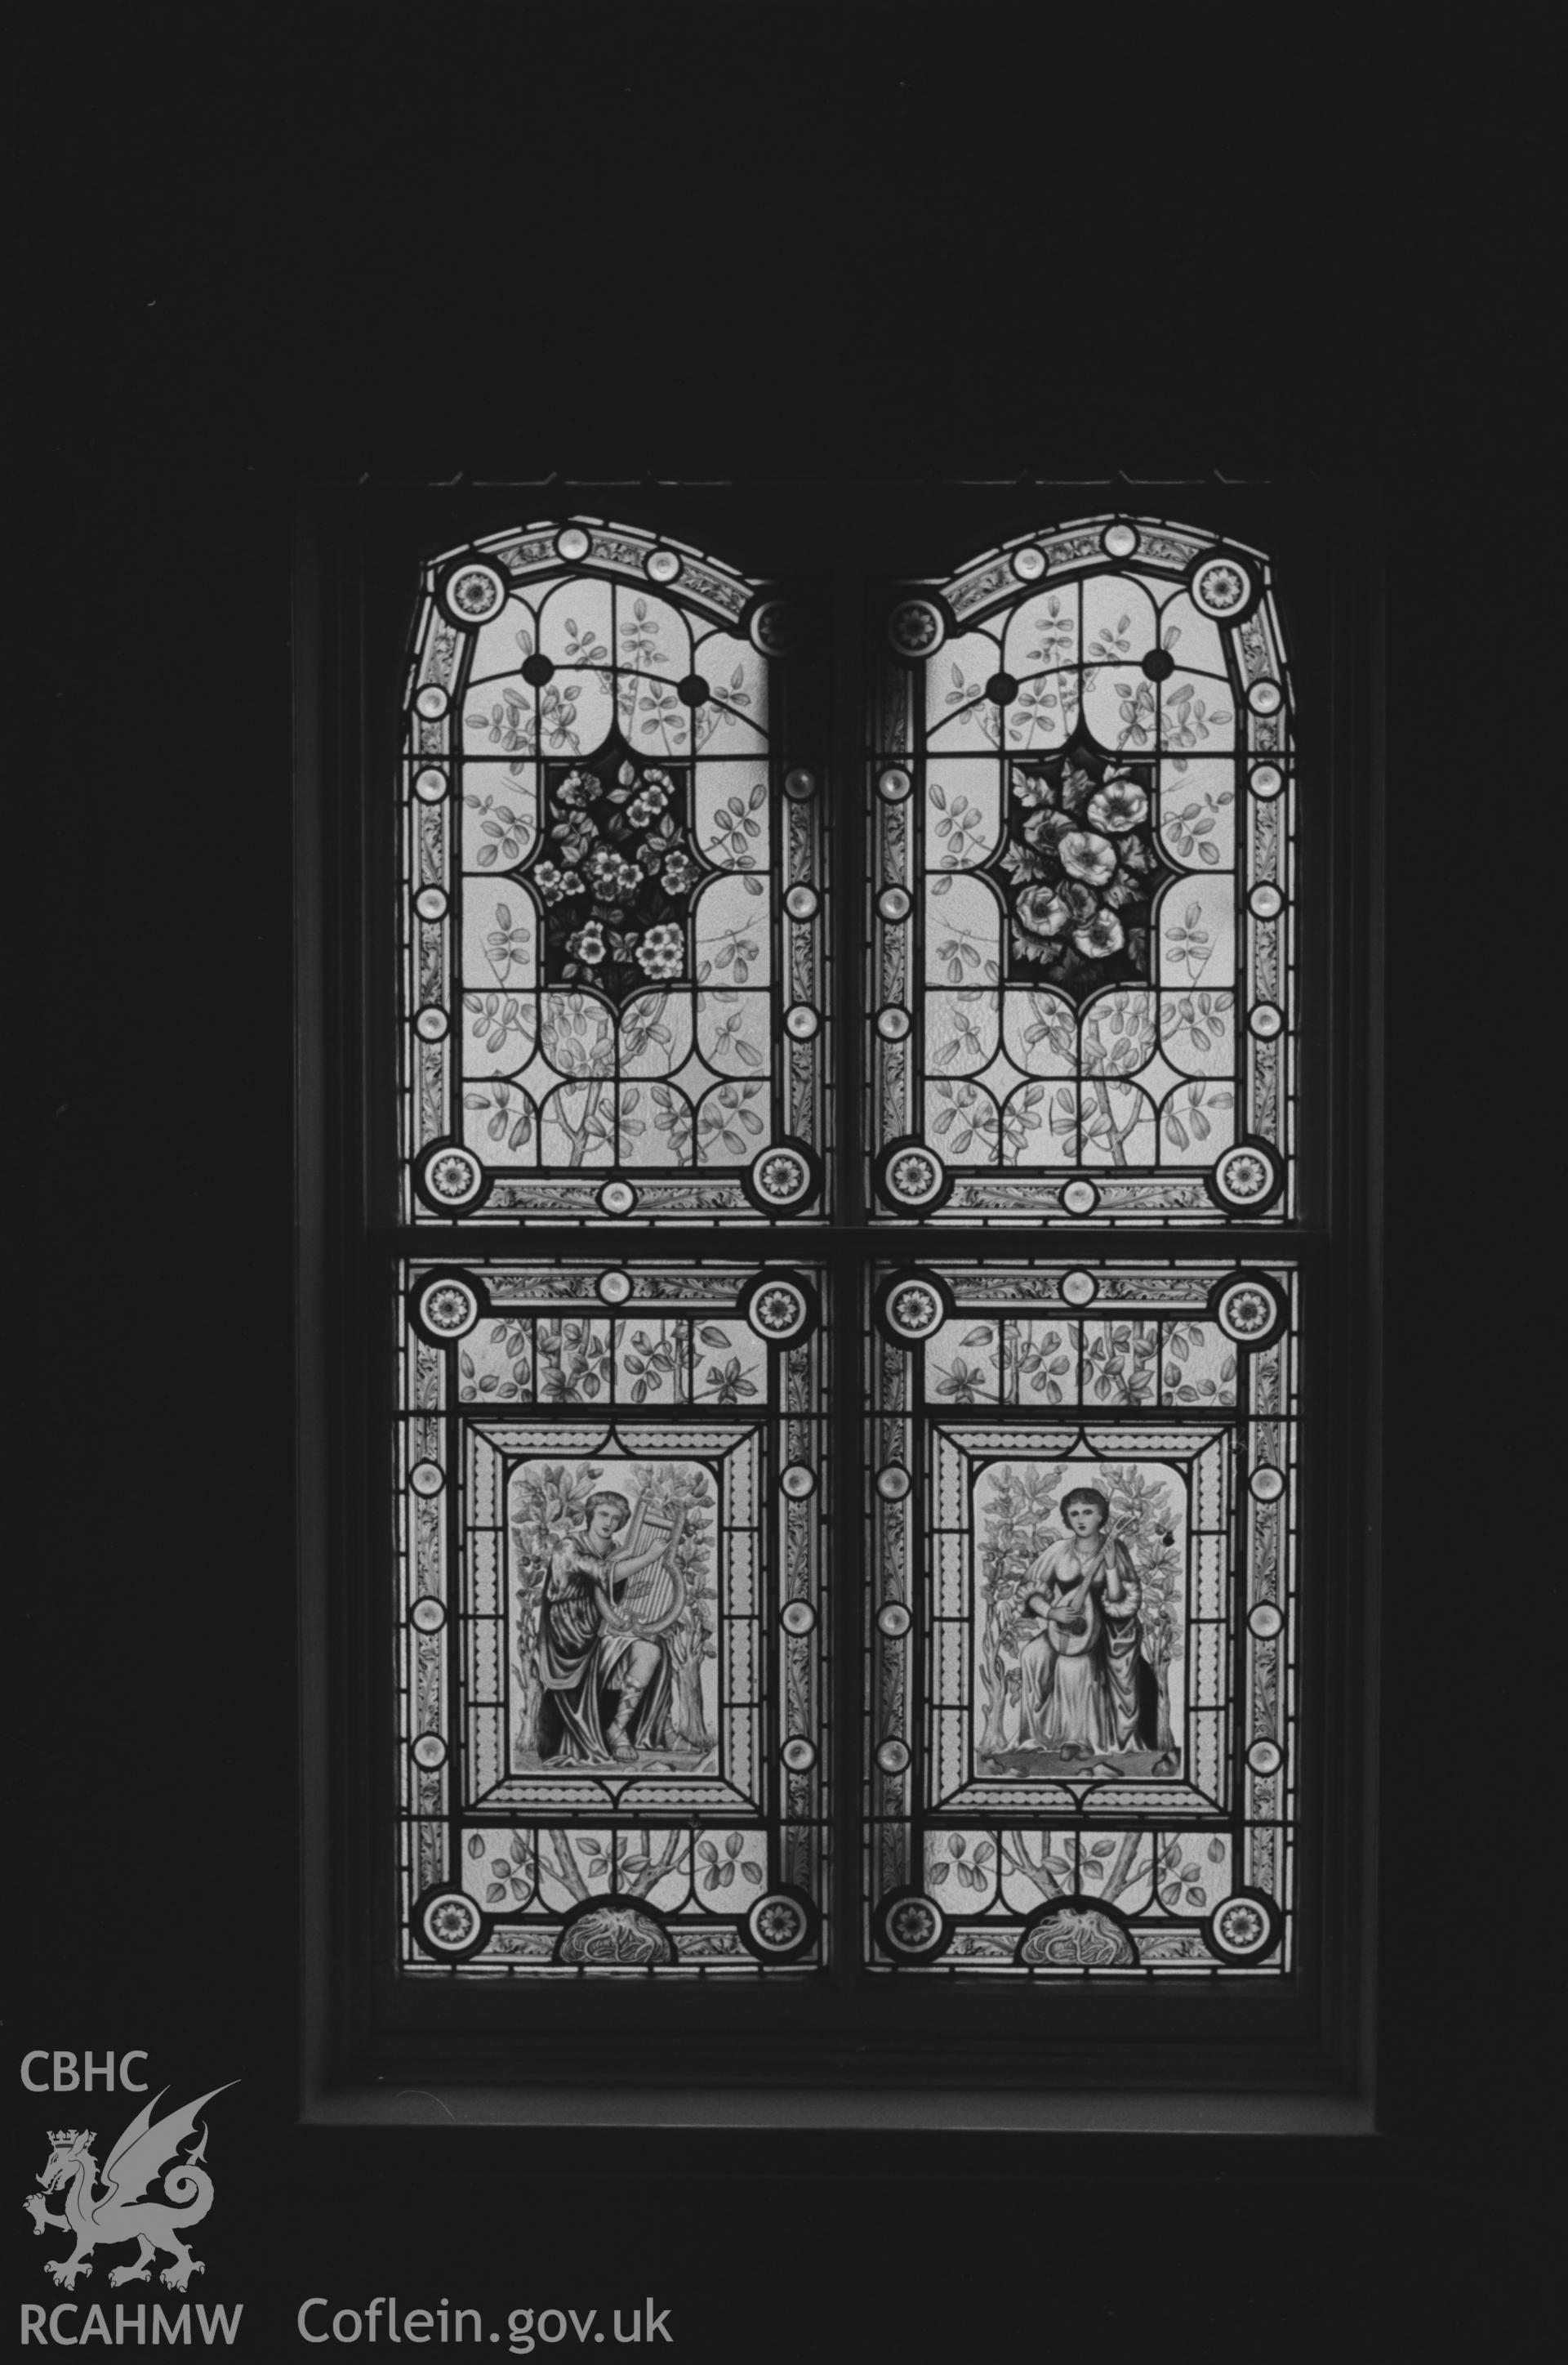 Digital copy of a black and white negative showing stained glass window at St Michael's church, Lledrod, south east of Aberystwyth. Photographed by Arthur O. Chater in September 1966.